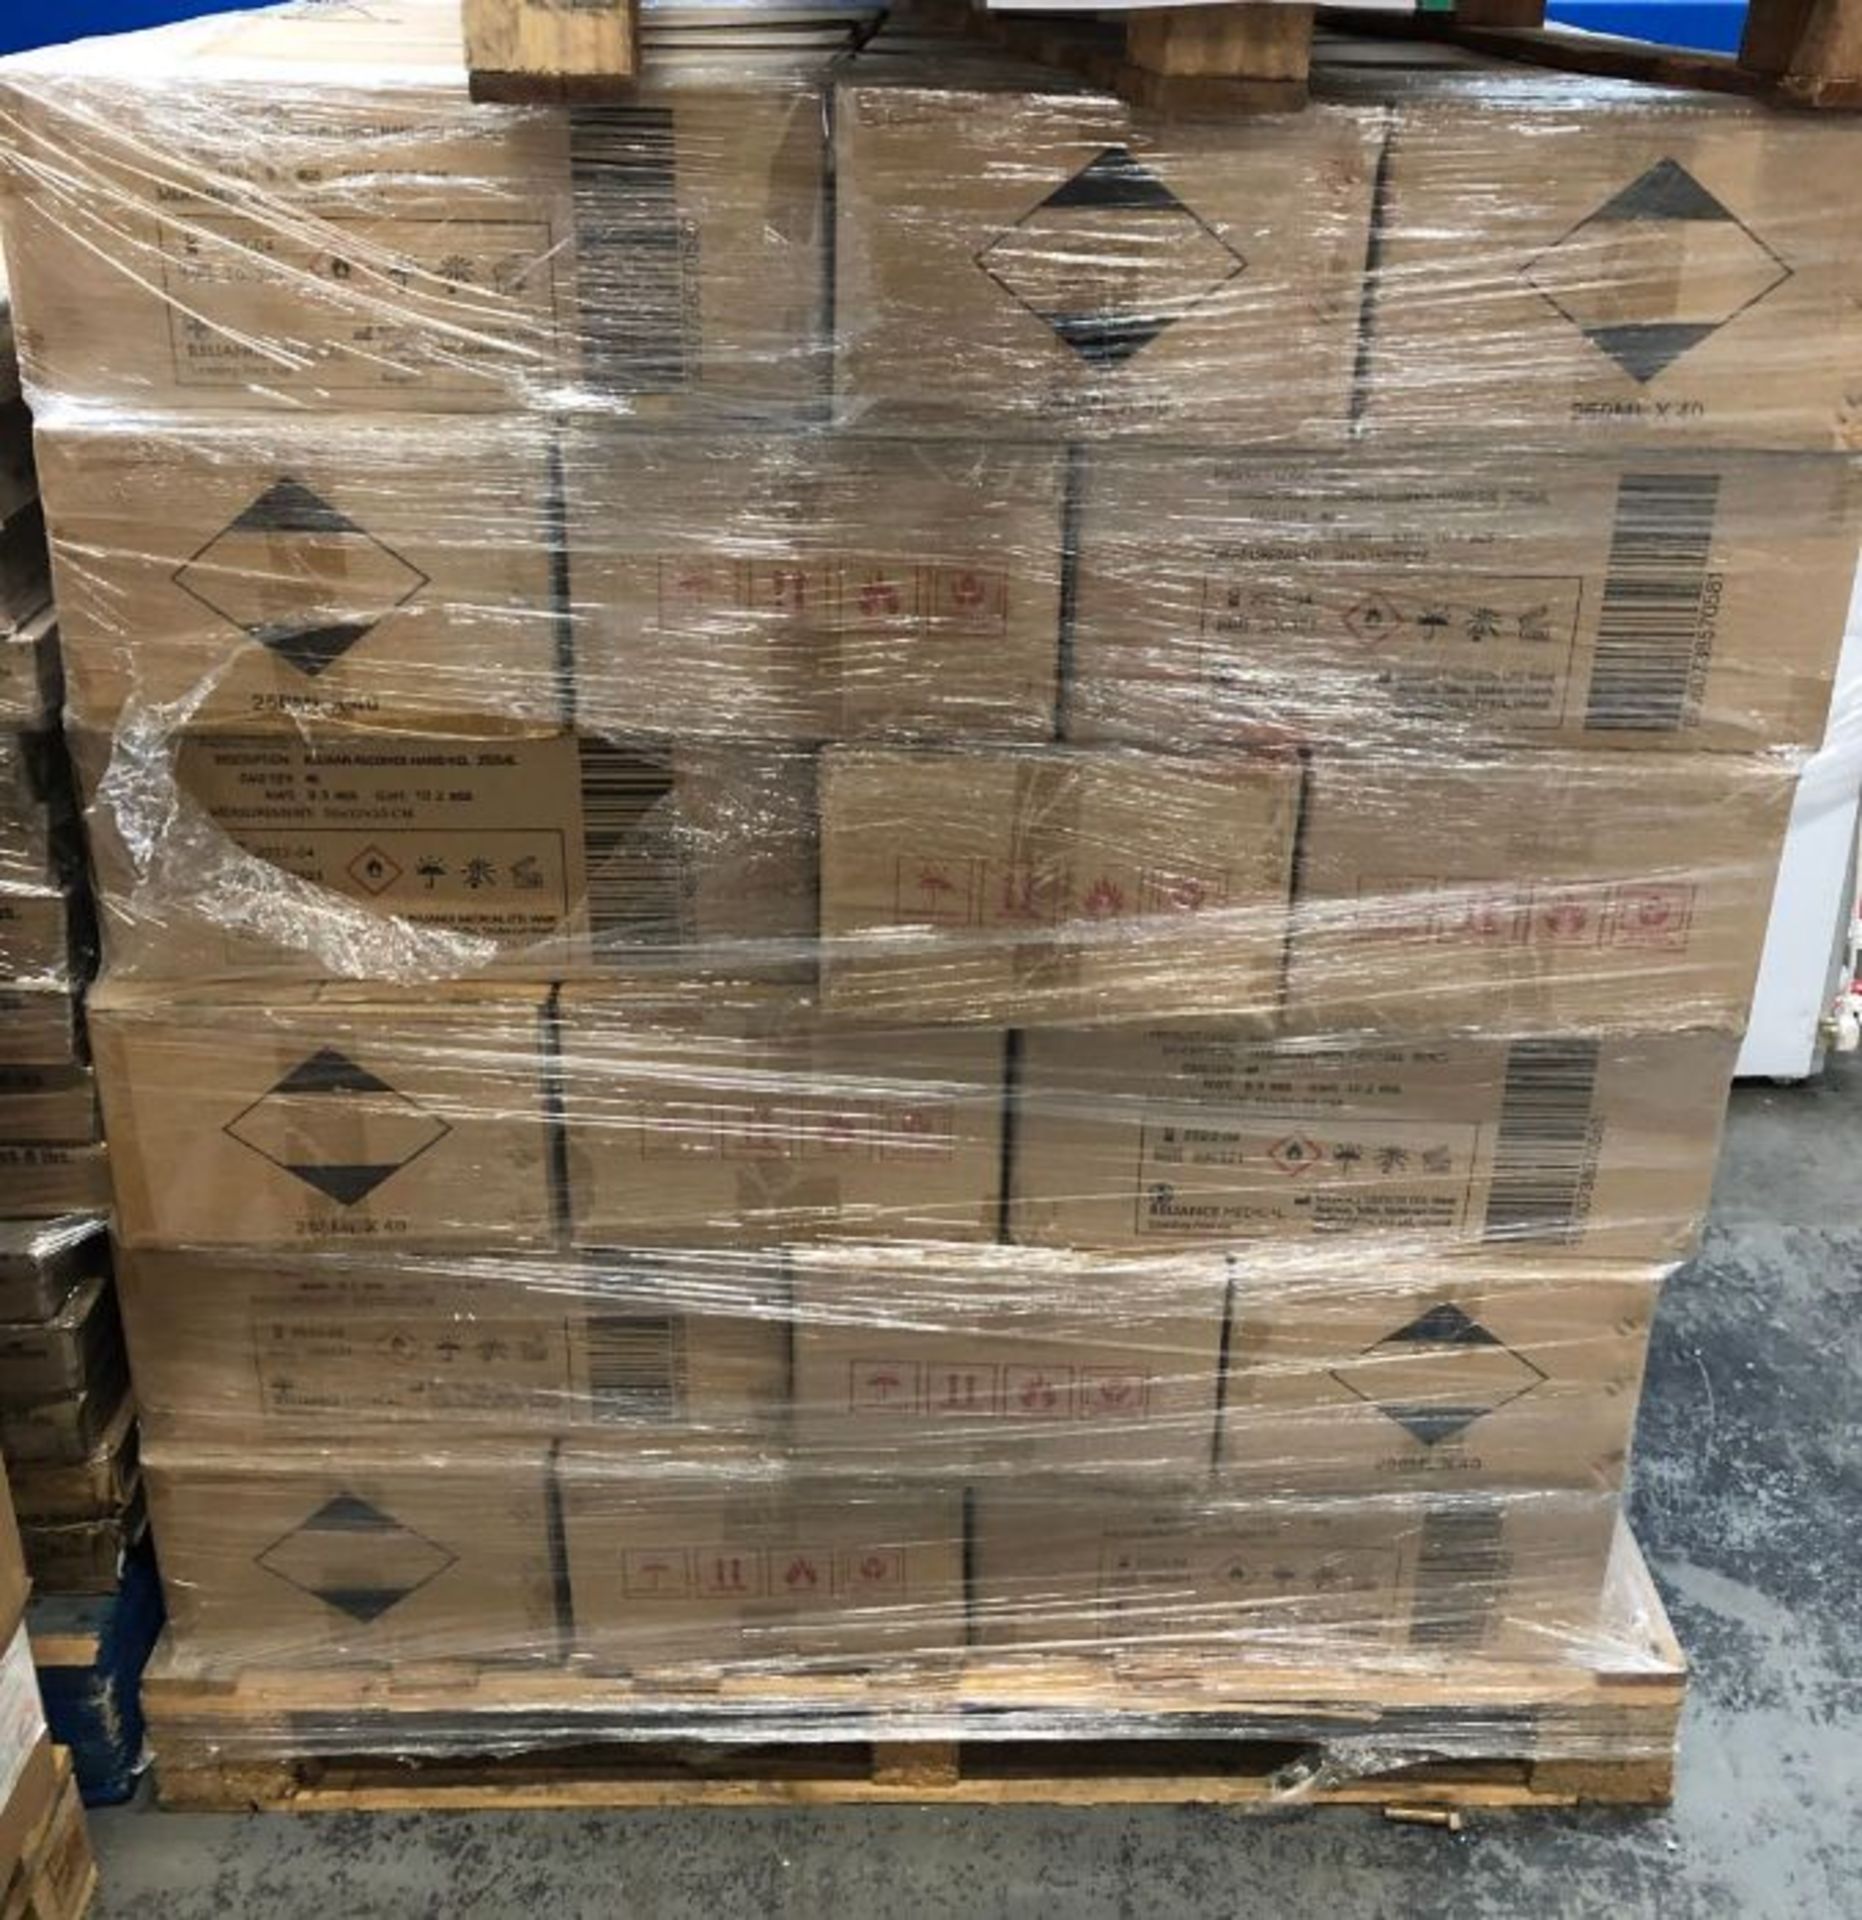 1 X BULK PALLET TO CONTAIN A LARGE ASSORTMENT OF RELISAN ALCOHOL HAND GELS / SIZES OF BOTTLES MAY